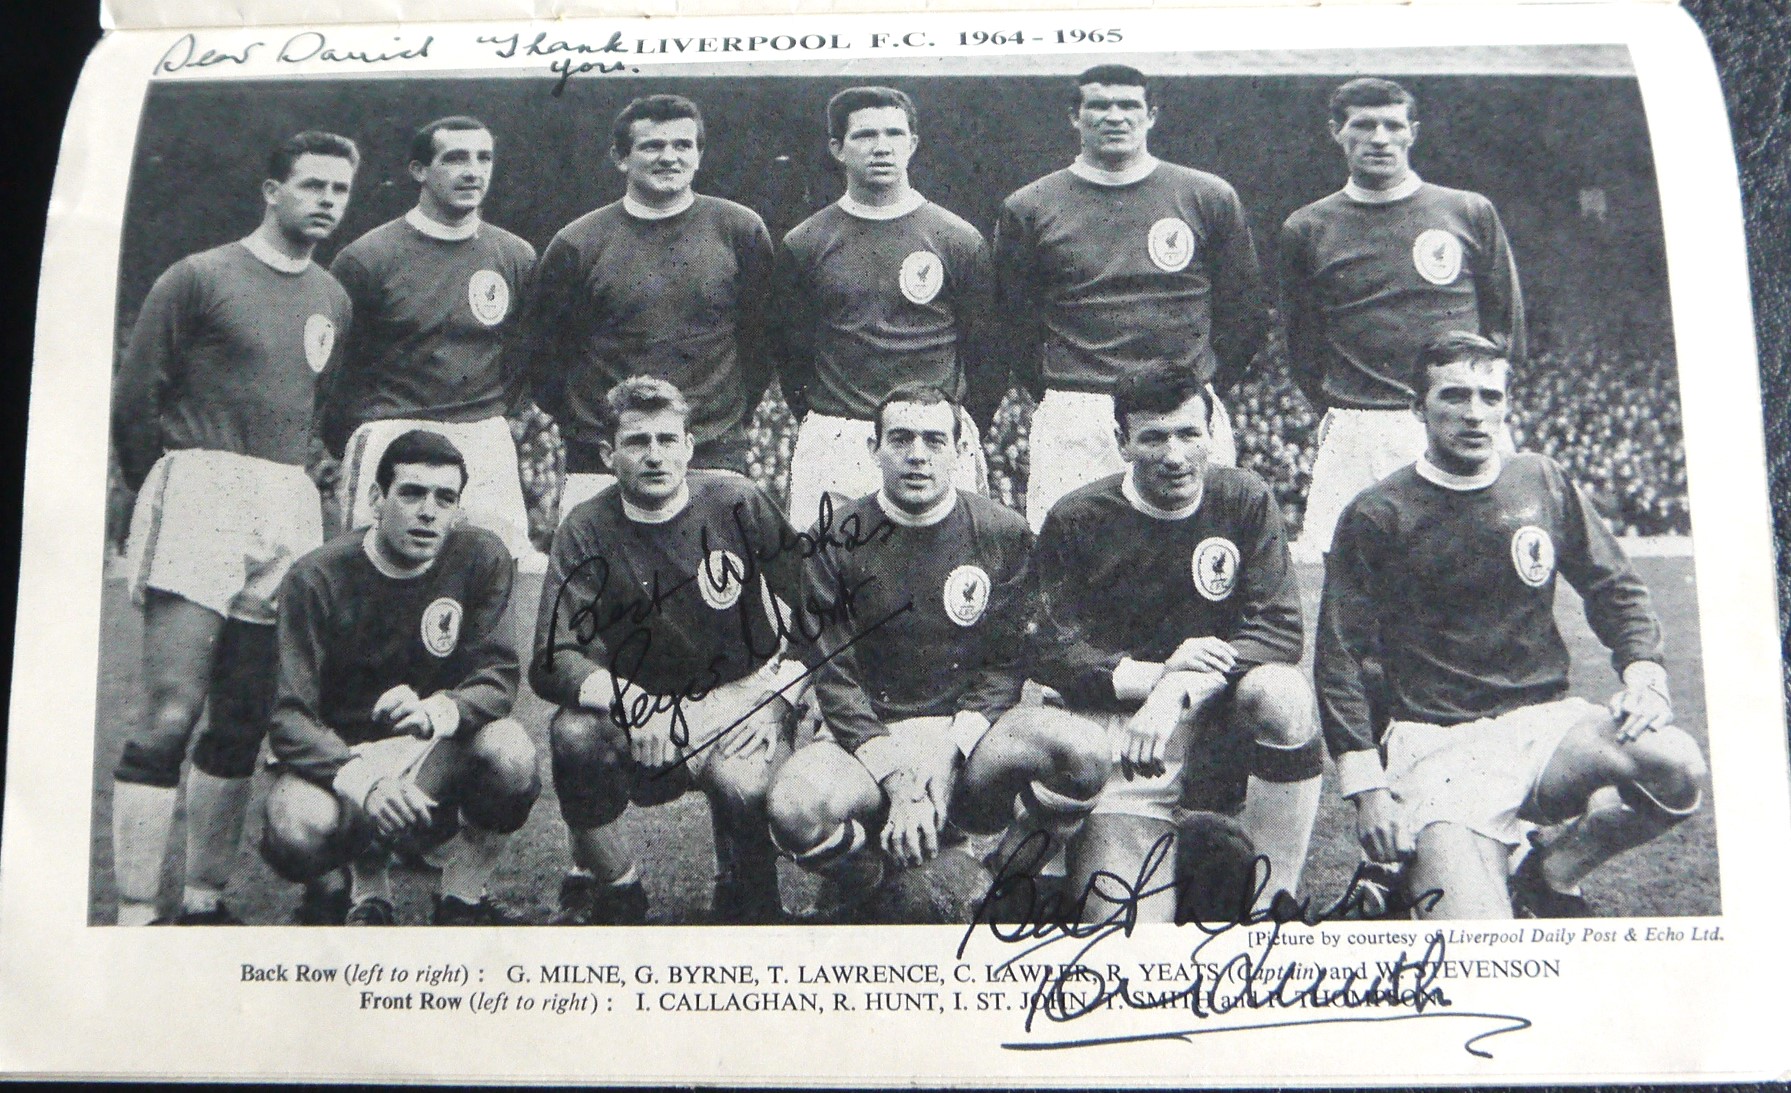 1965 FA CUP FINAL LEEDS UNITED V LIVERPOOL FULLY SIGNED BY THE LIVERPOOL TEAM - Image 3 of 3